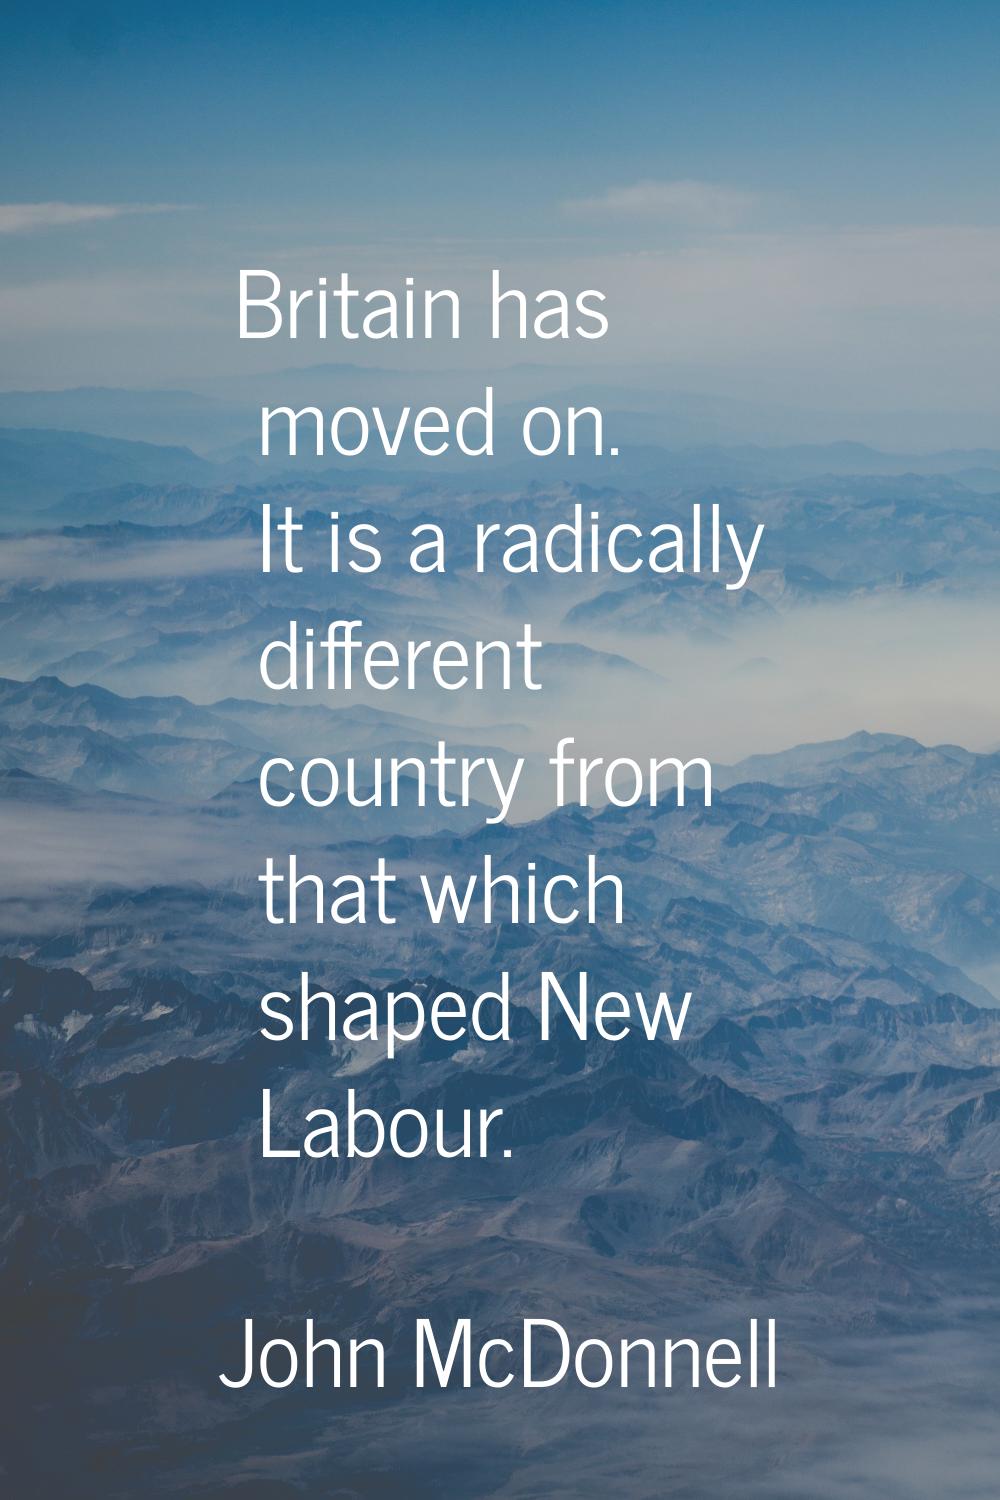 Britain has moved on. It is a radically different country from that which shaped New Labour.